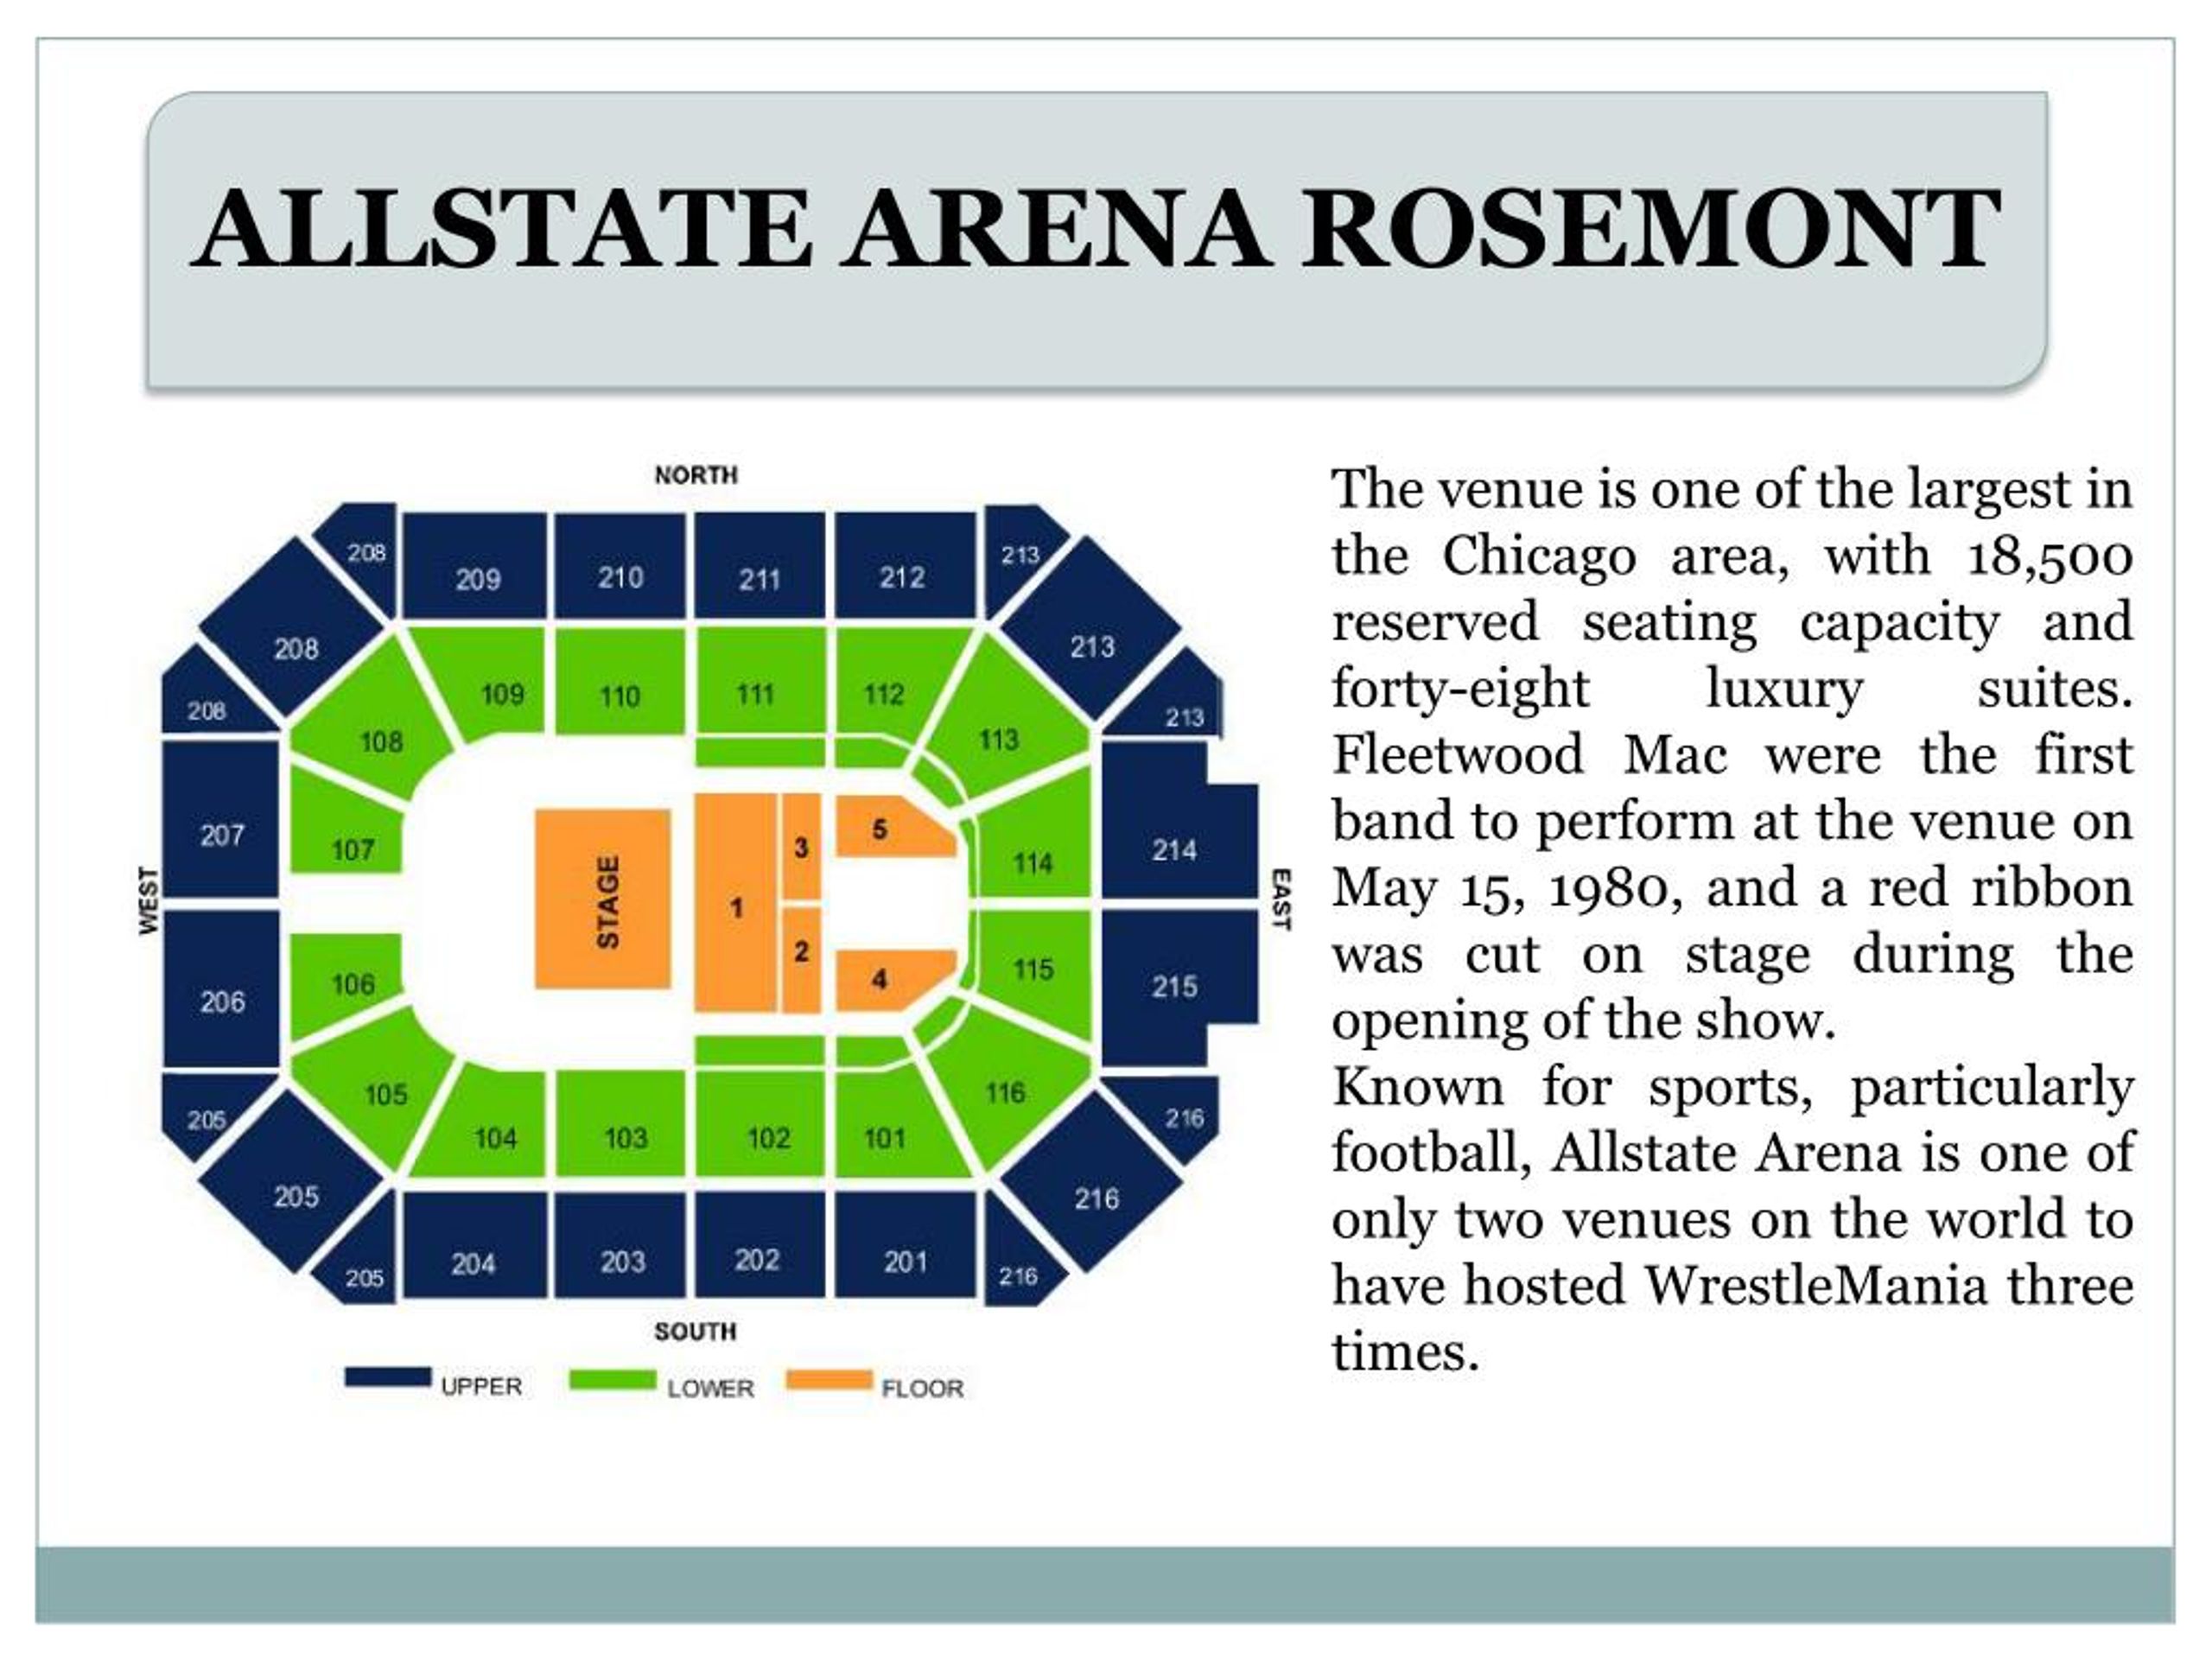 PPT Allstate Arena Rosemont PowerPoint Presentation, free download